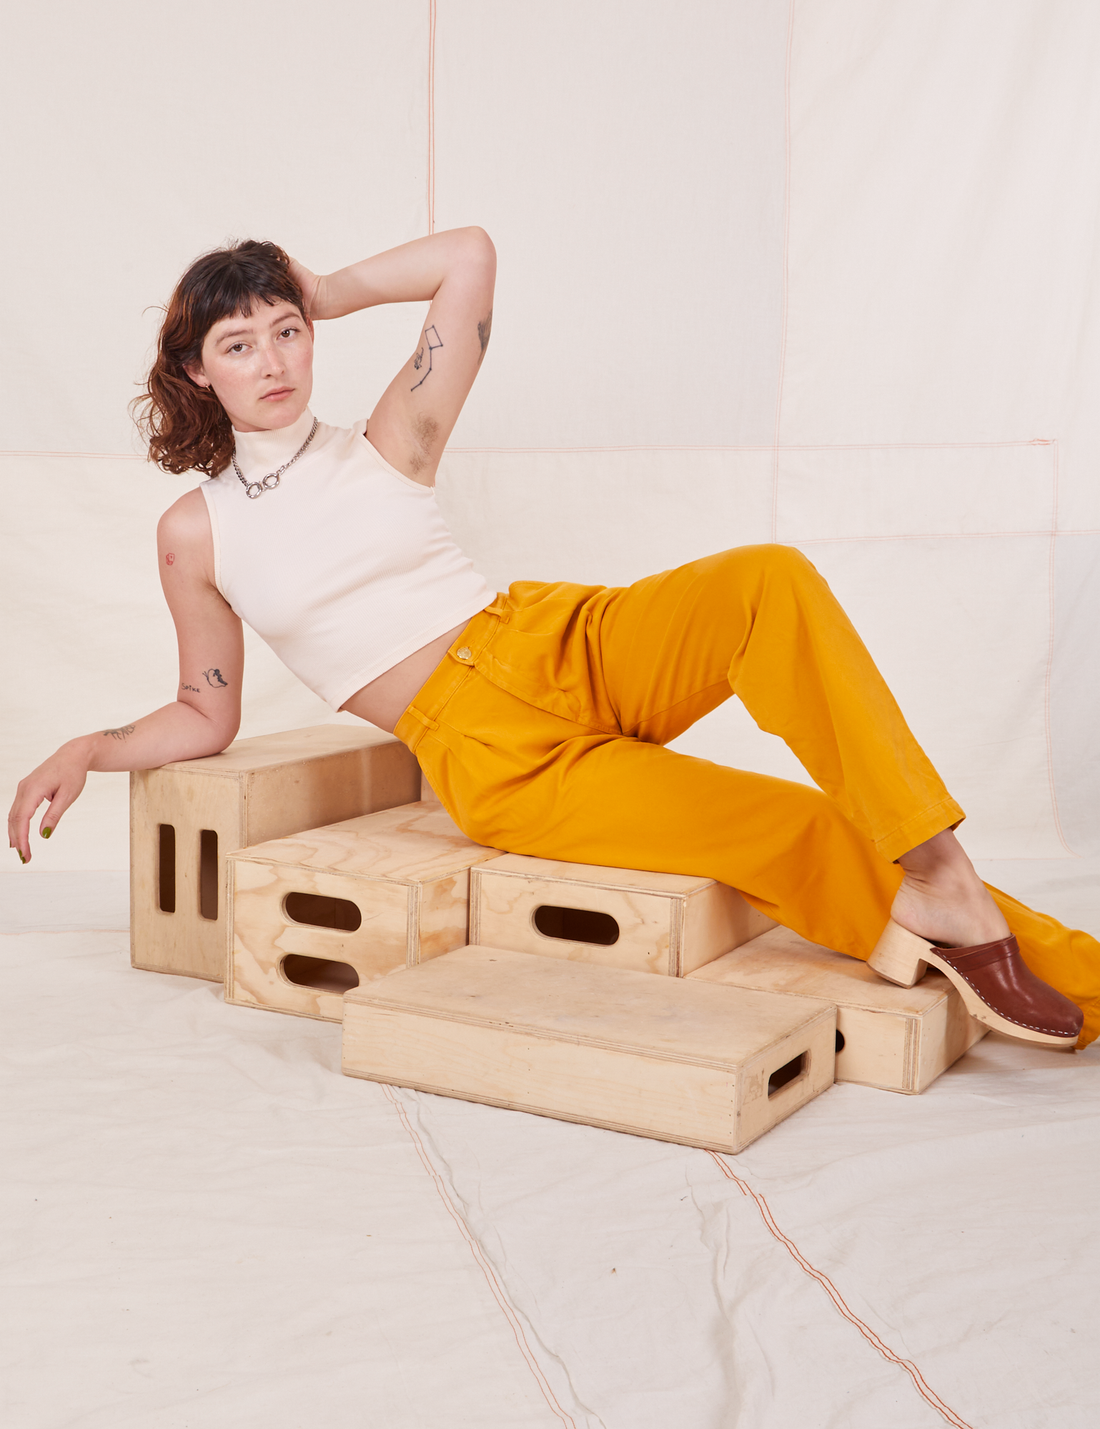 Organic Trousers in Mustard Yellow and vintage off-white Sleeveless Essential Turtleneck worn by Alex